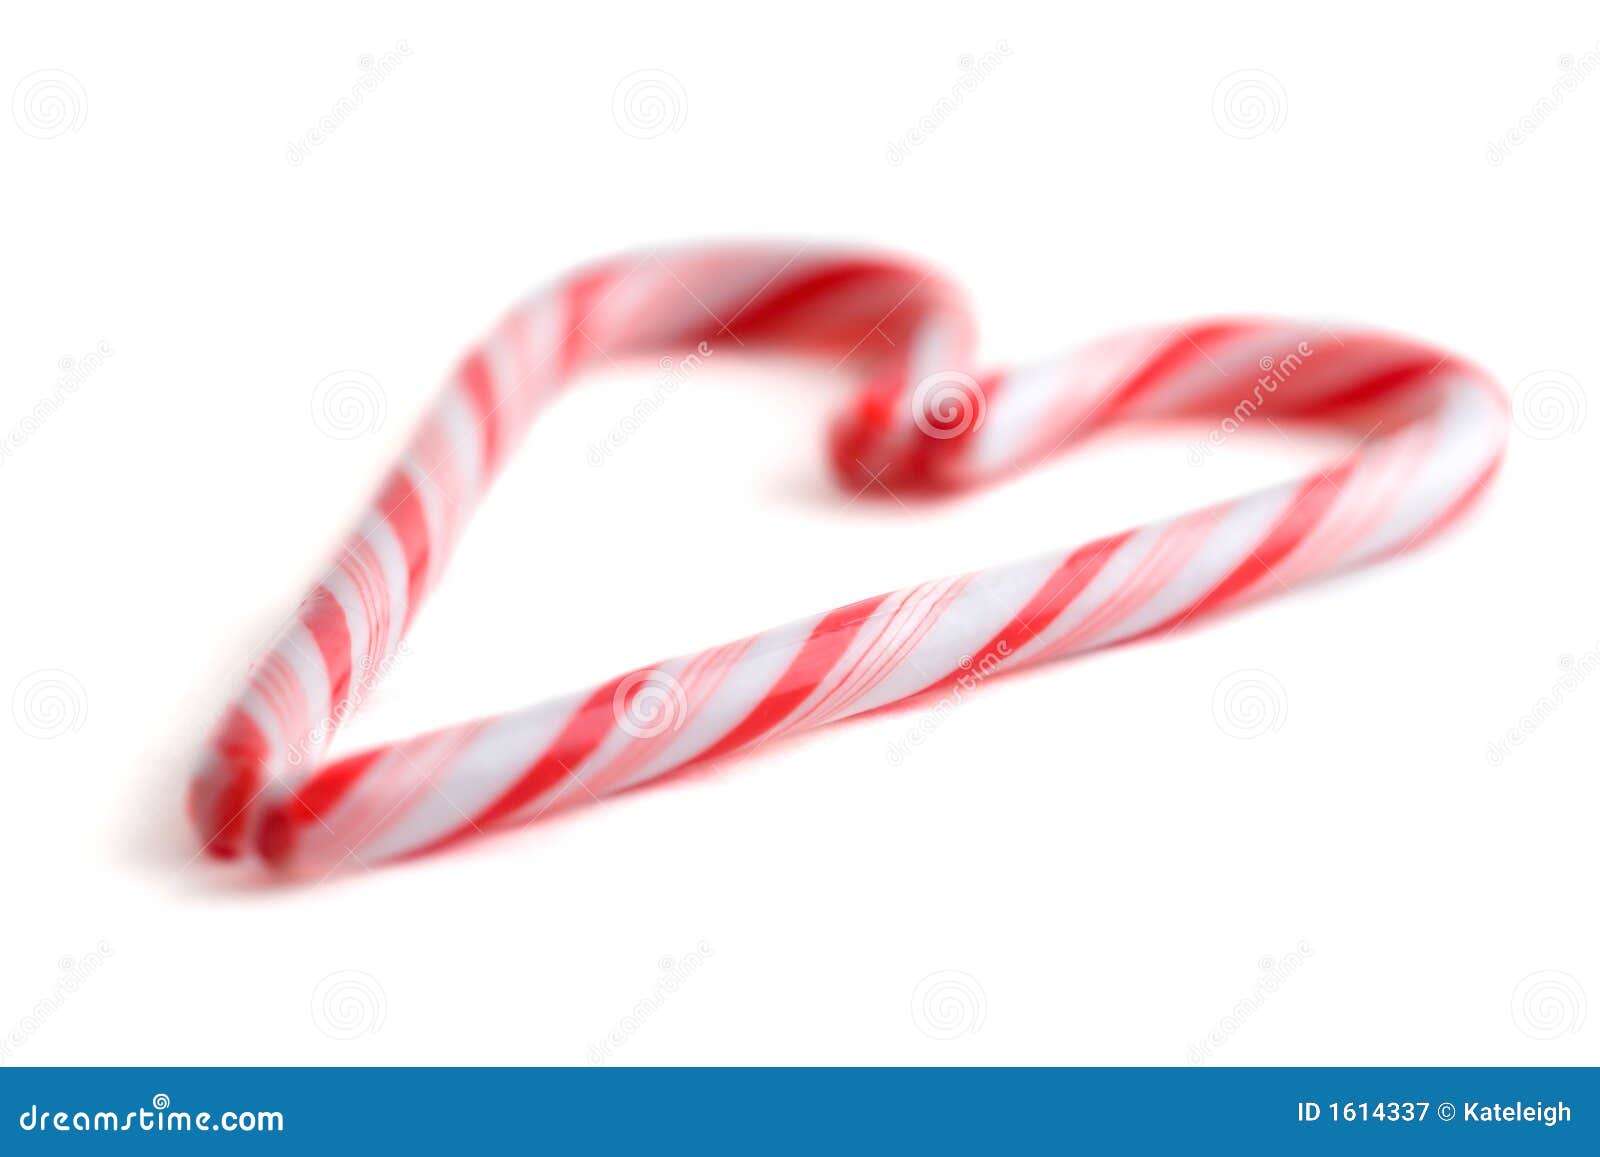 Candy Cane Heart stock image. Image of holiday, sweet - 1614337